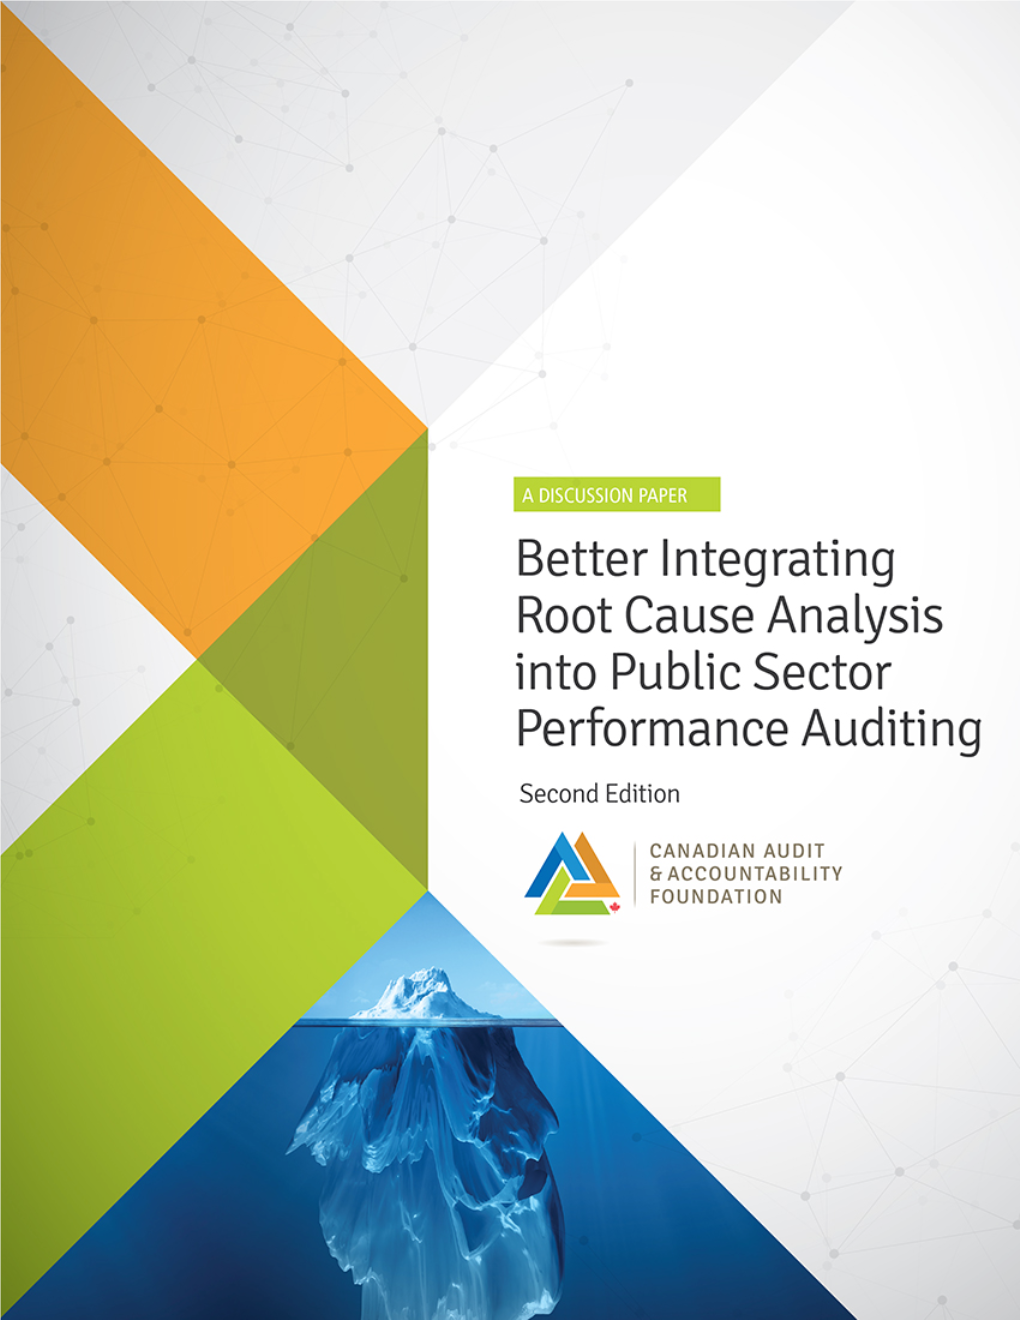 Better Integrating Root Cause Analysis Into Public Sector Performance Auditing – Second Edition © 2020 Canadian Audit and Accountability Foundation